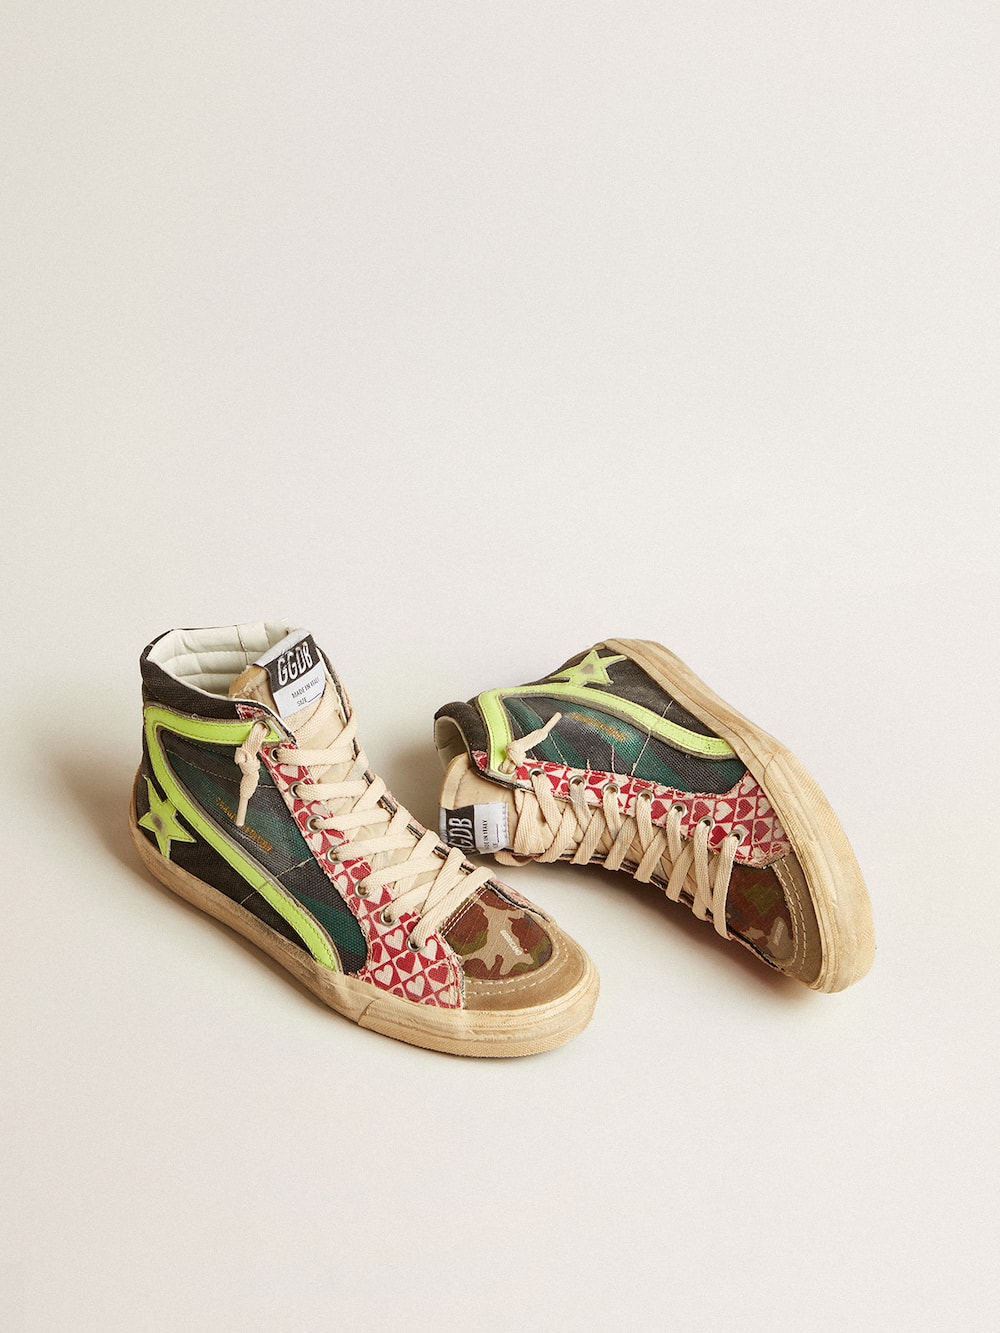 Golden Goose - Men’s Slide LAB in camo canvas with yellow leather star and flash in 